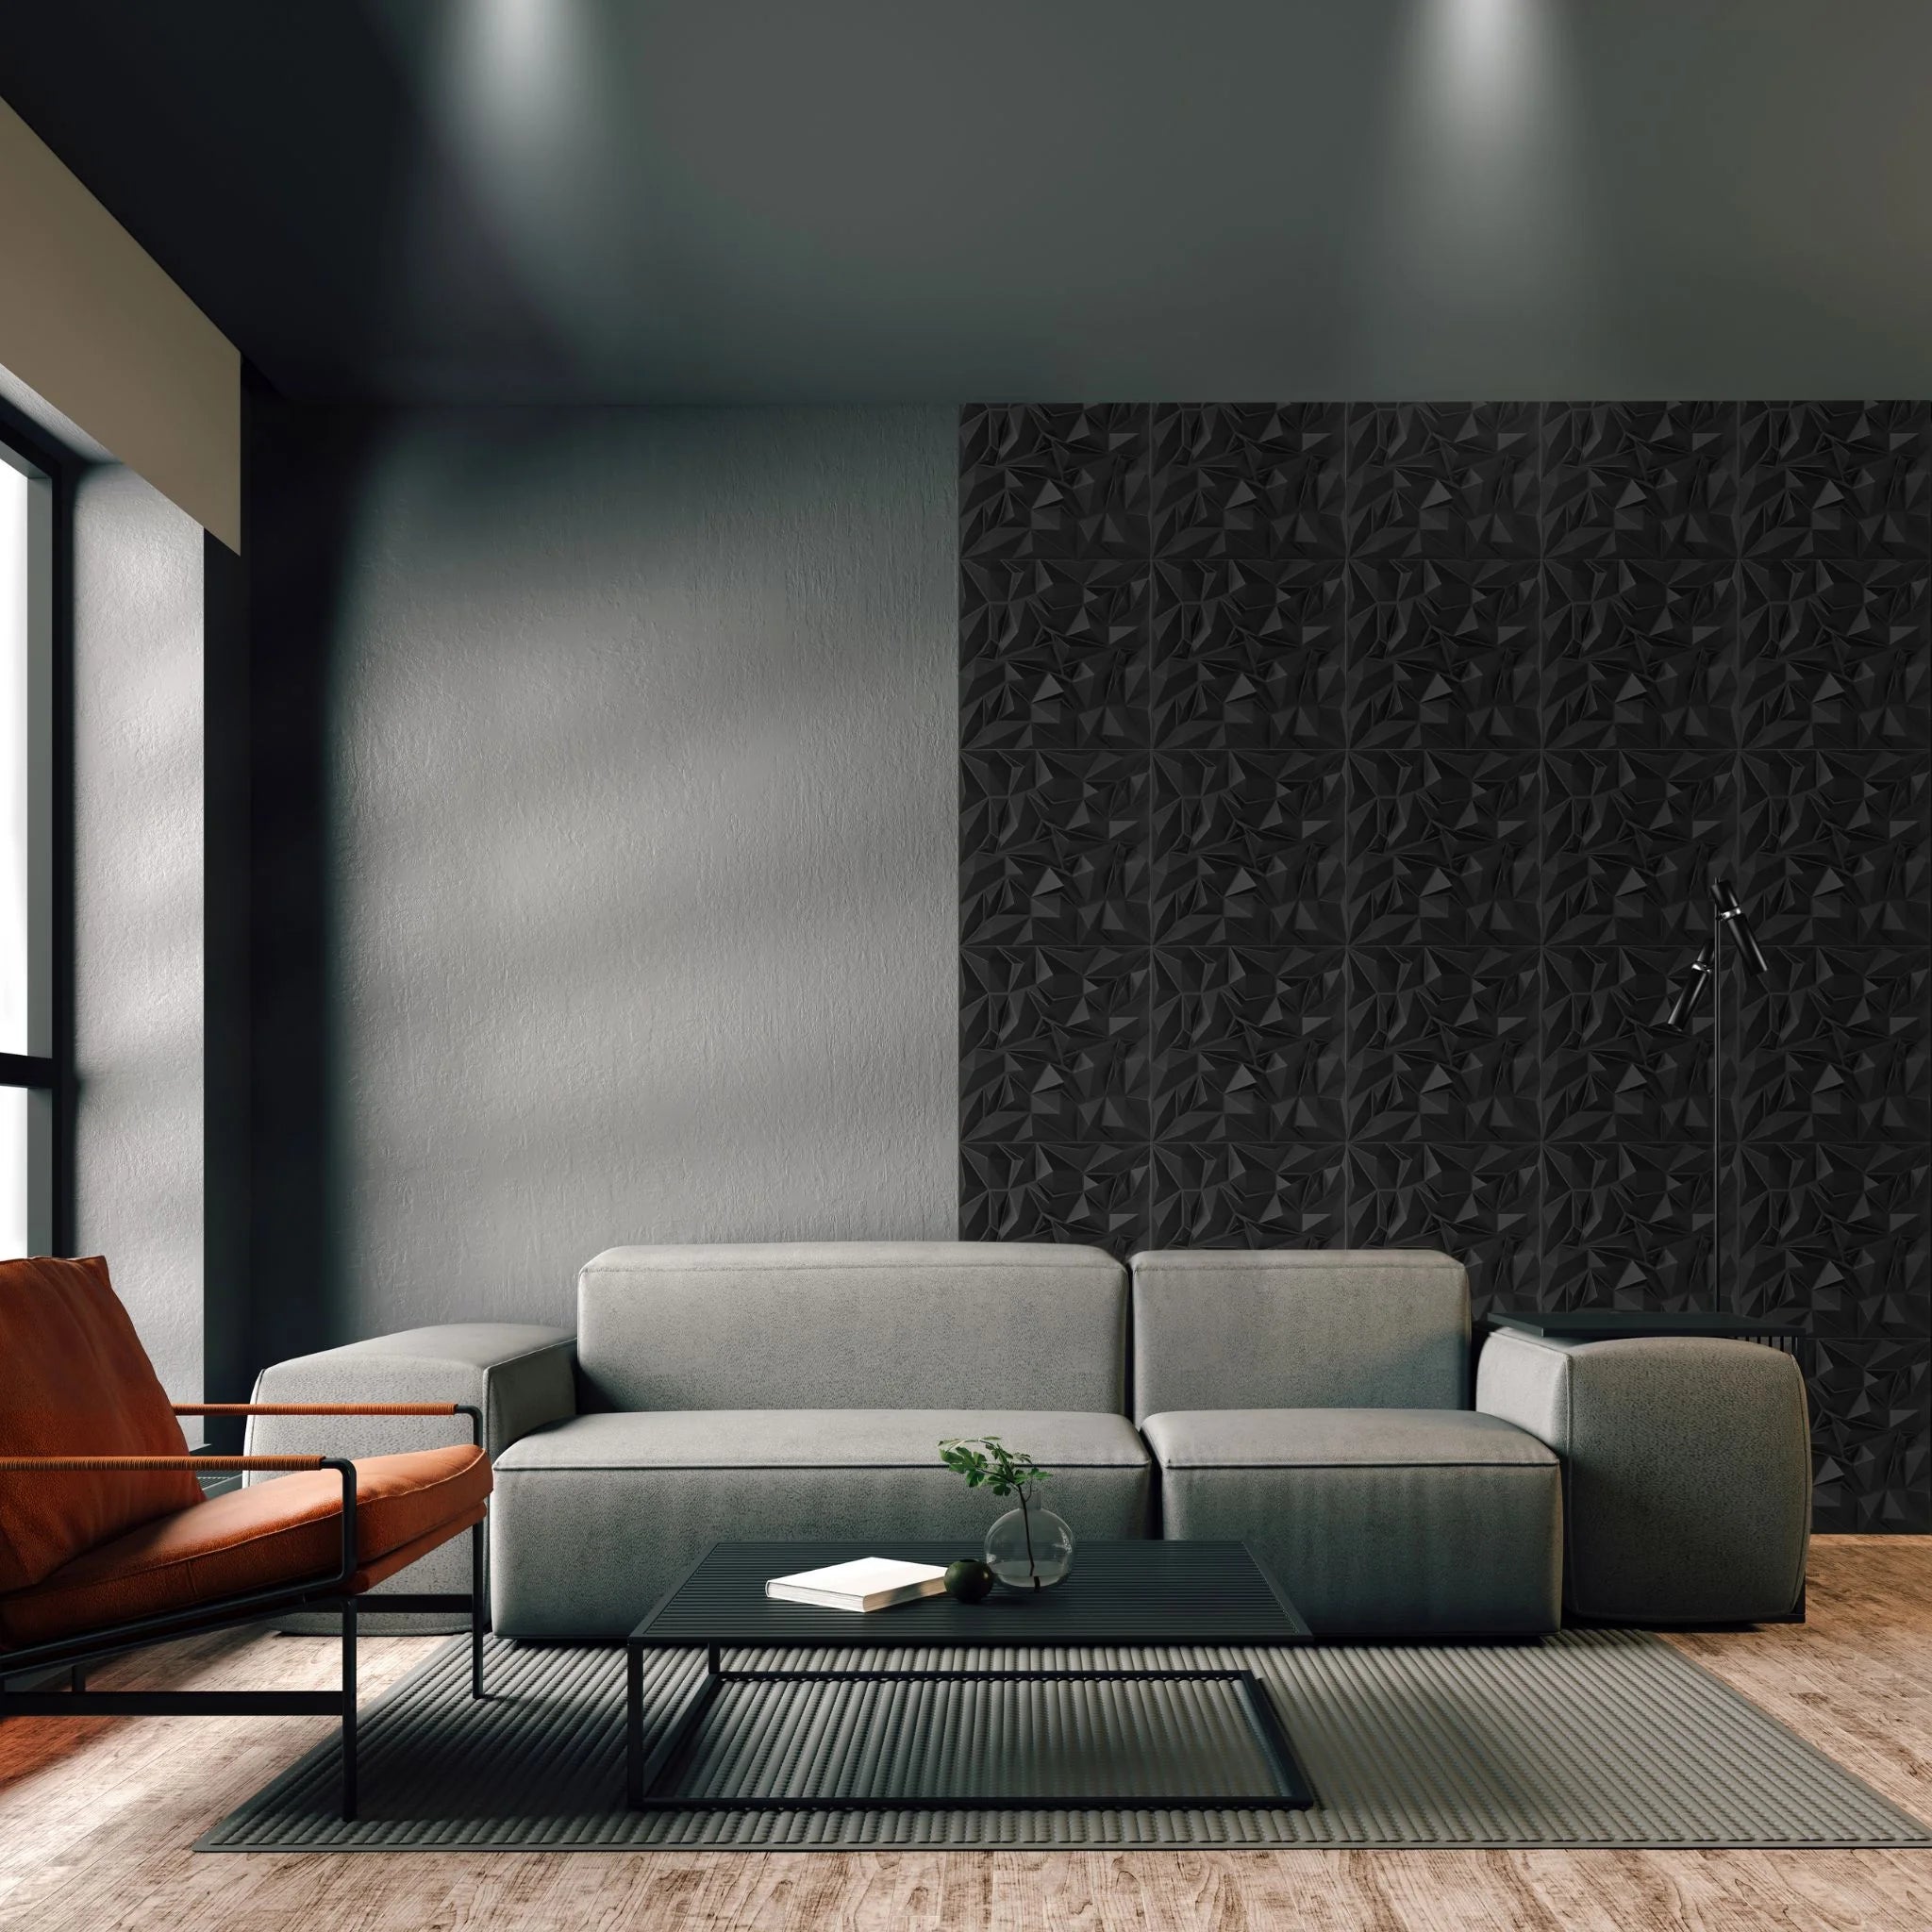 Modern living room with black PVC wall panel featuring geometric patterns